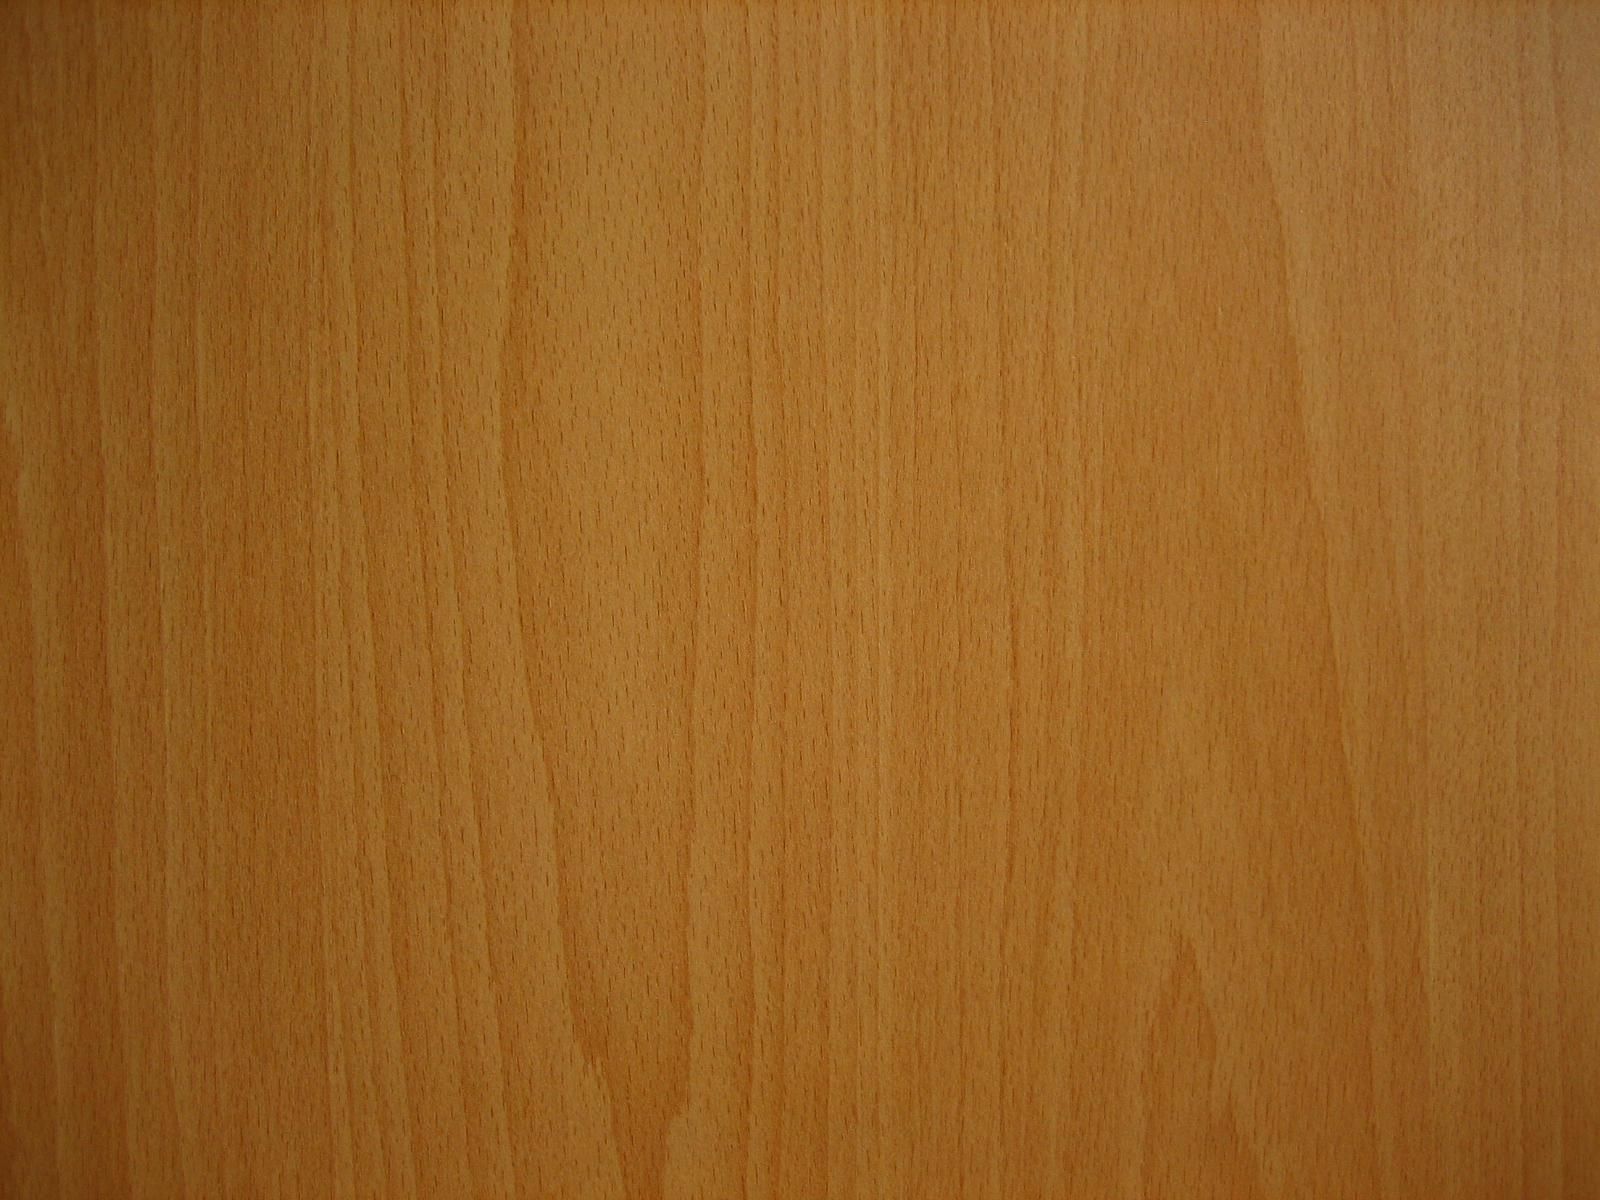 Brown wood surface photo